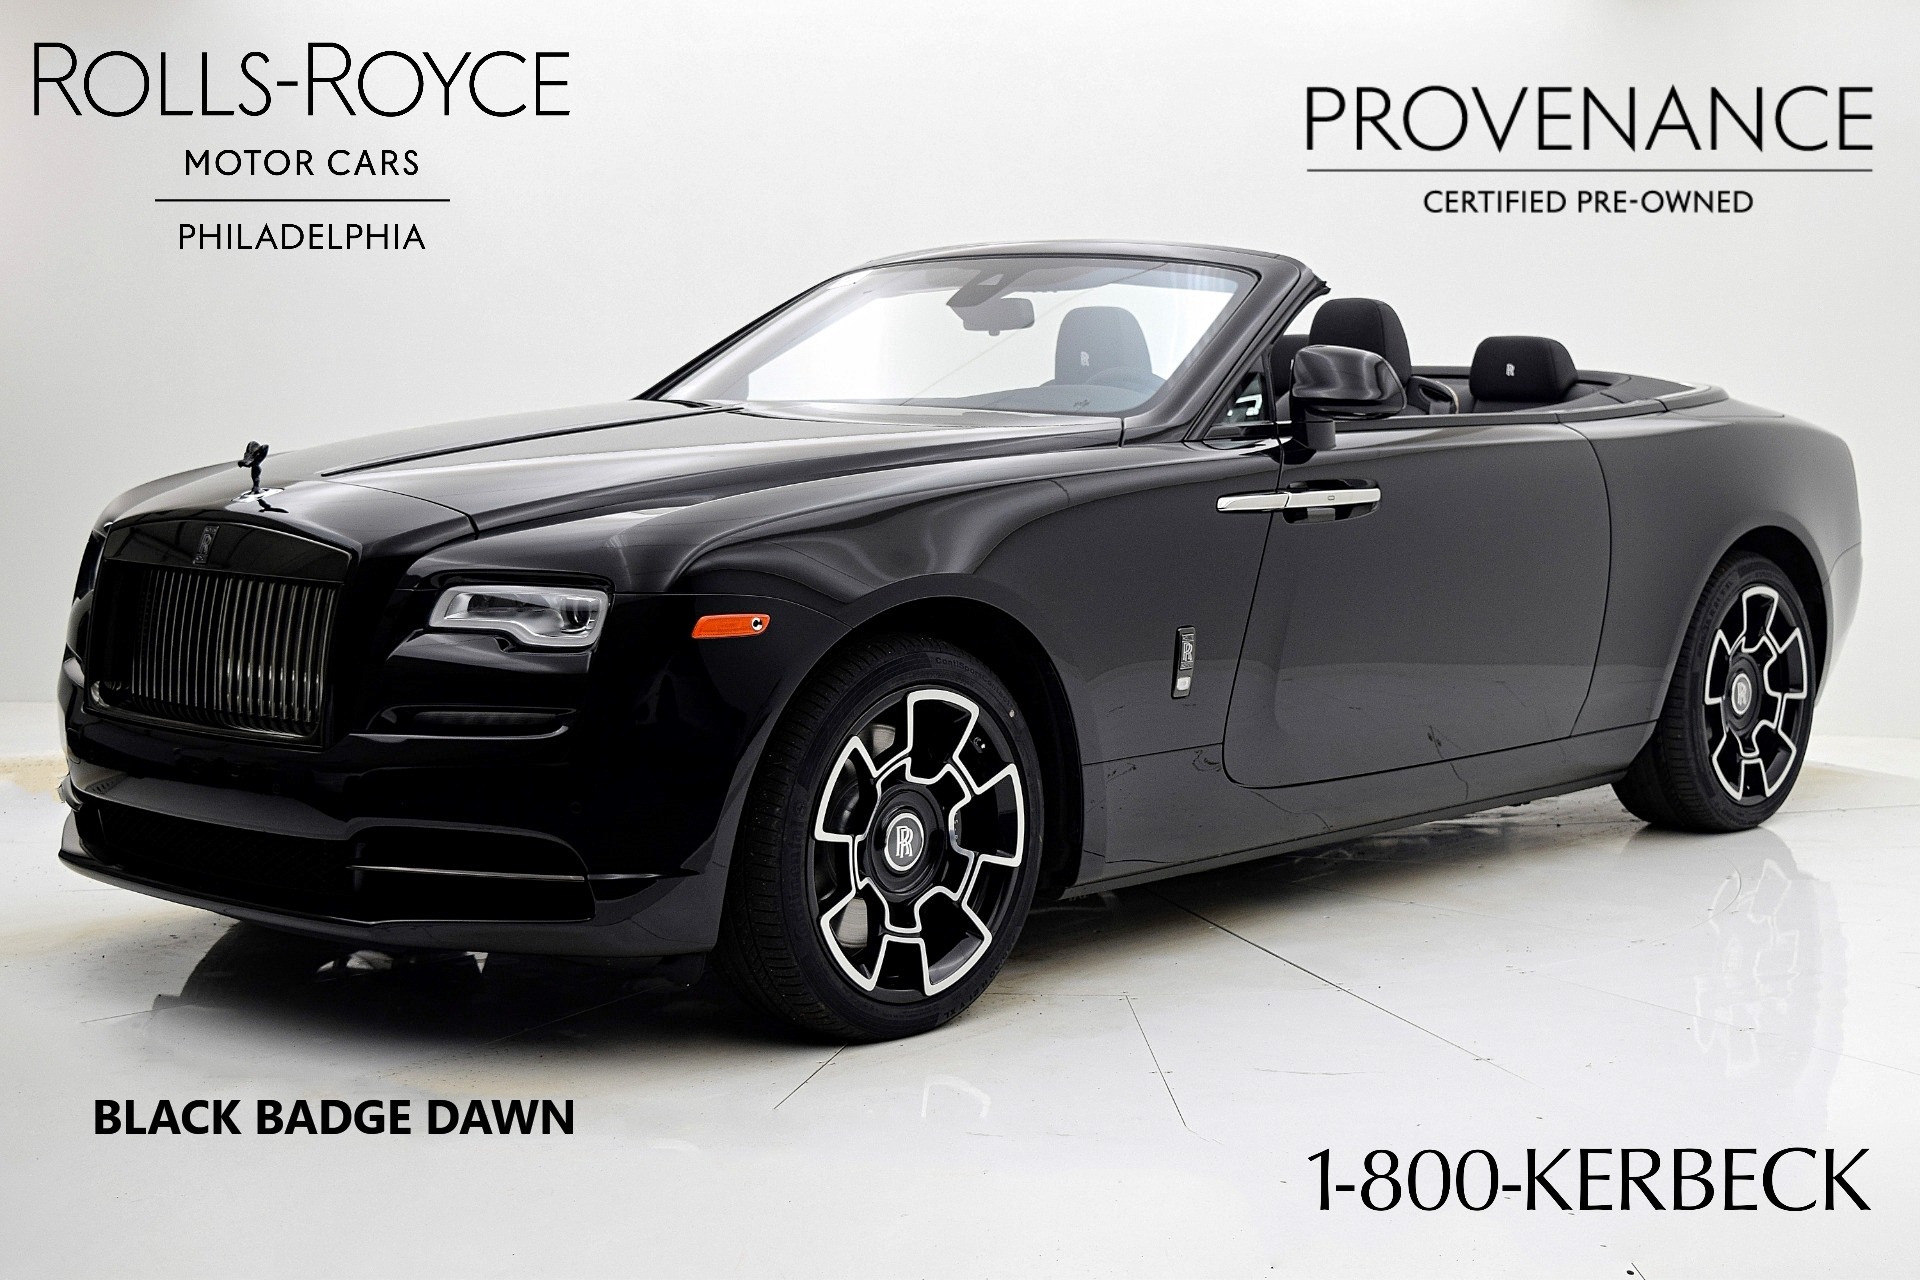 Used 2019 Rolls-Royce Black Badge Dawn / LEASE OPTIONS AVAILABLE for sale $379,000 at Rolls-Royce Motor Cars Philadelphia in Palmyra NJ 08065 2